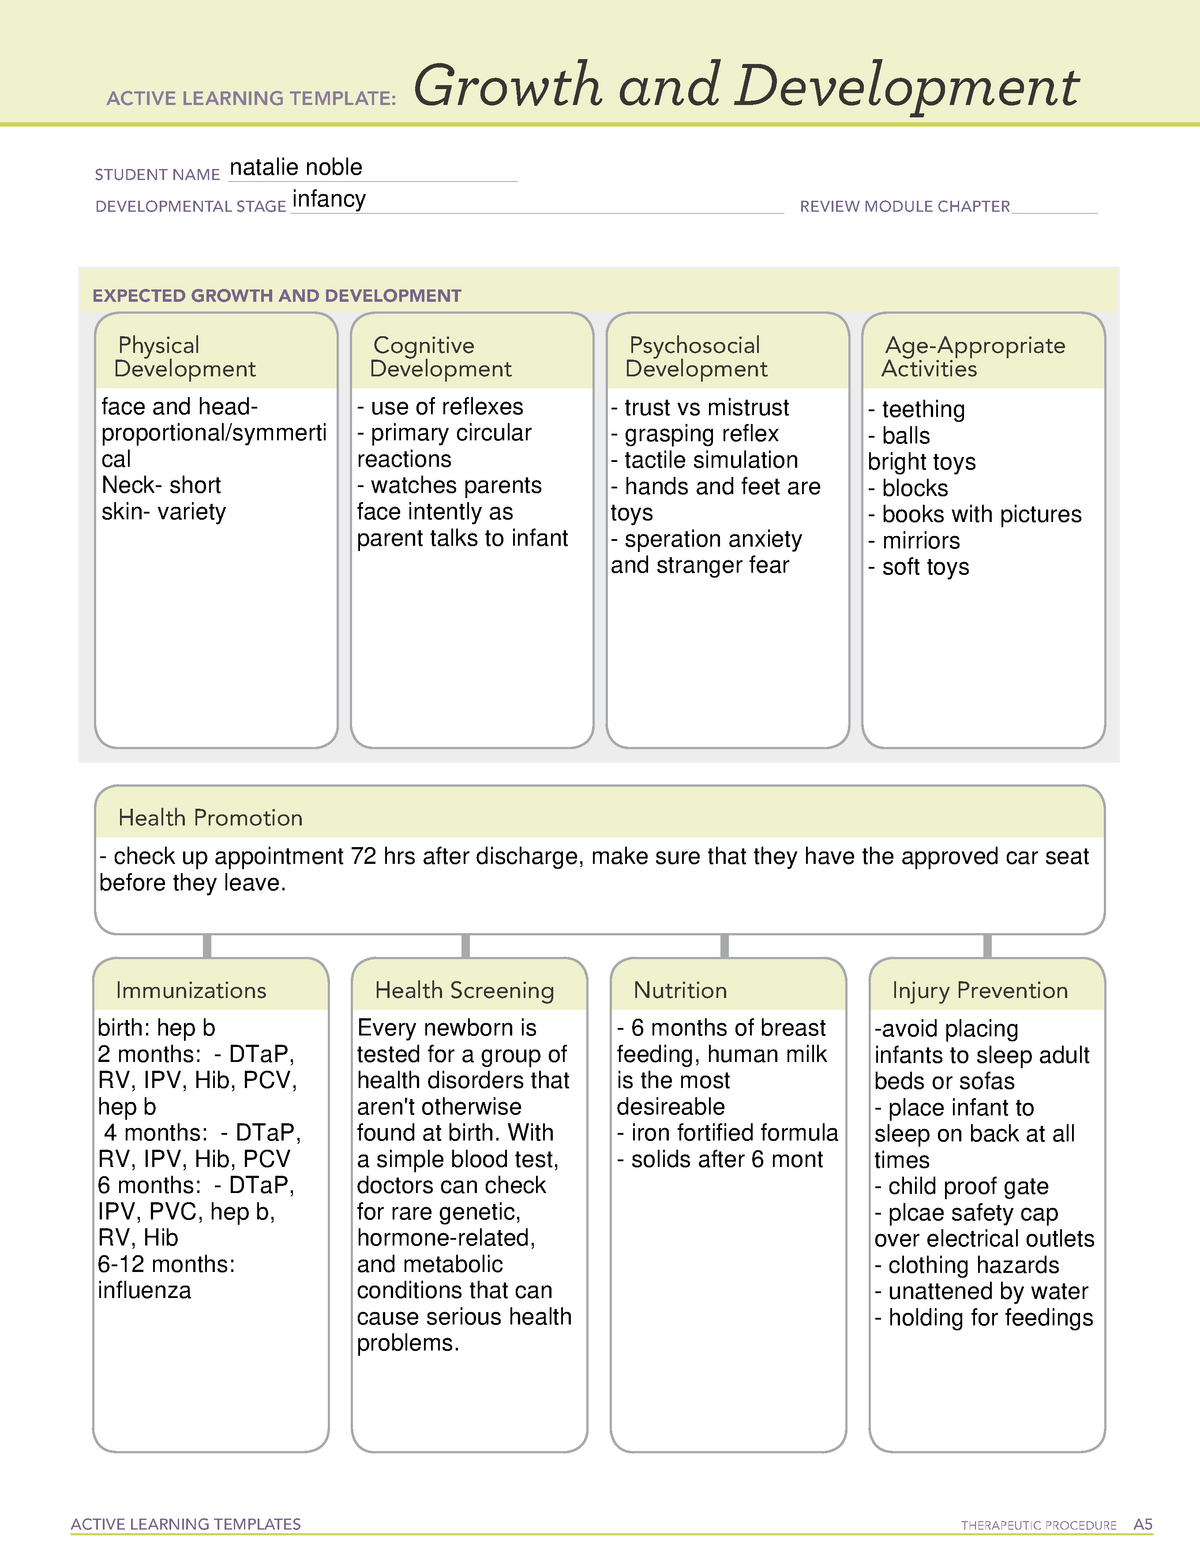 infancy growth and development ati template ACTIVE LEARNING TEMPLATES